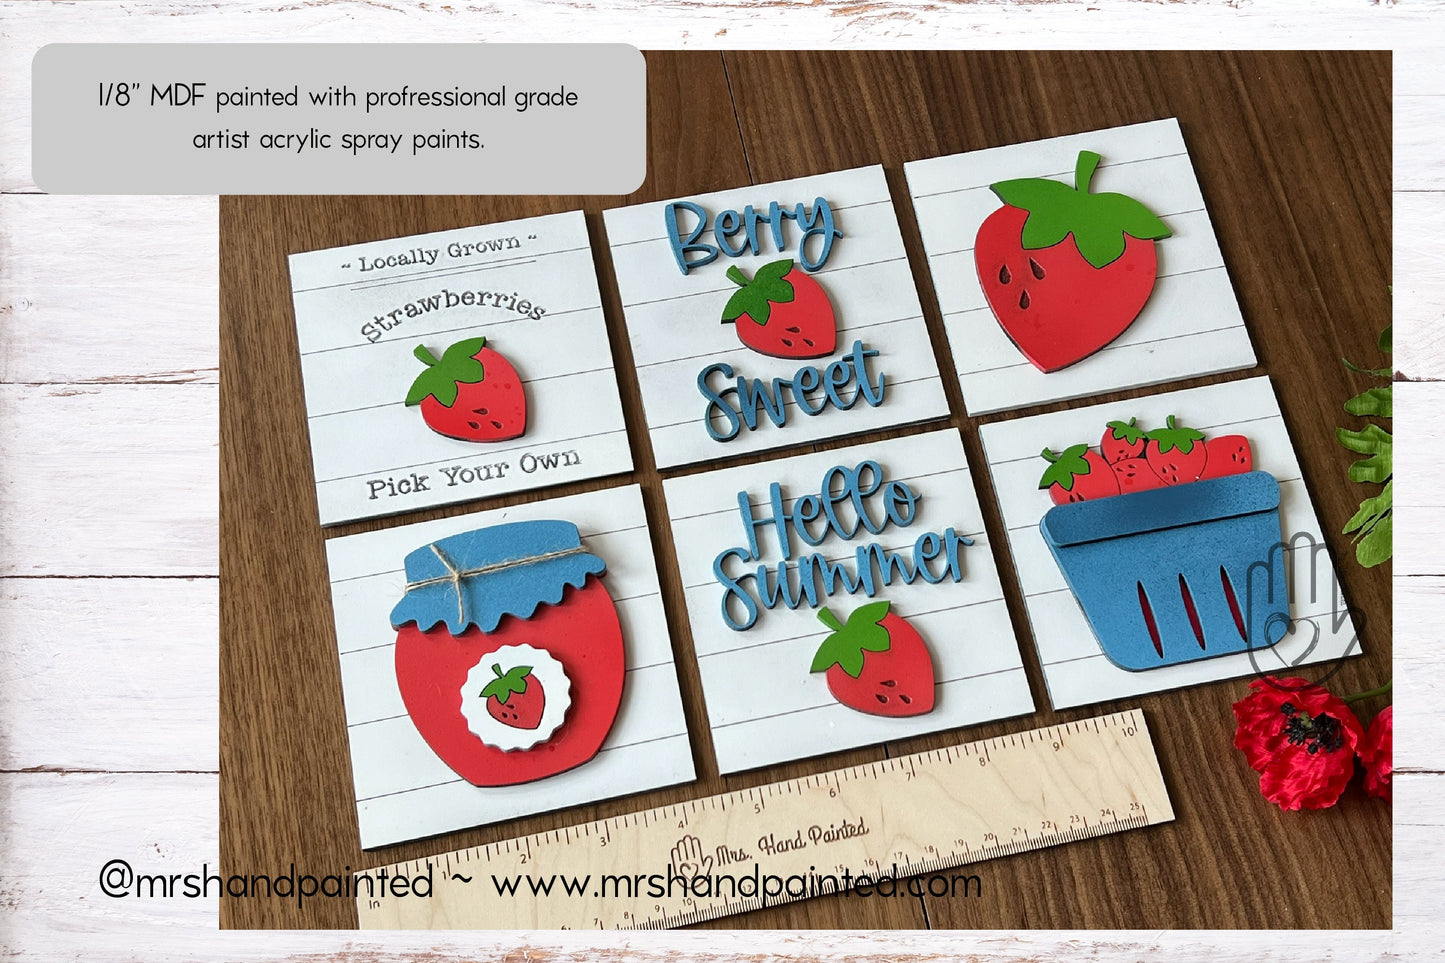 Summer Strawberry Interchangeable Signs - Laser Cut Wood Painted